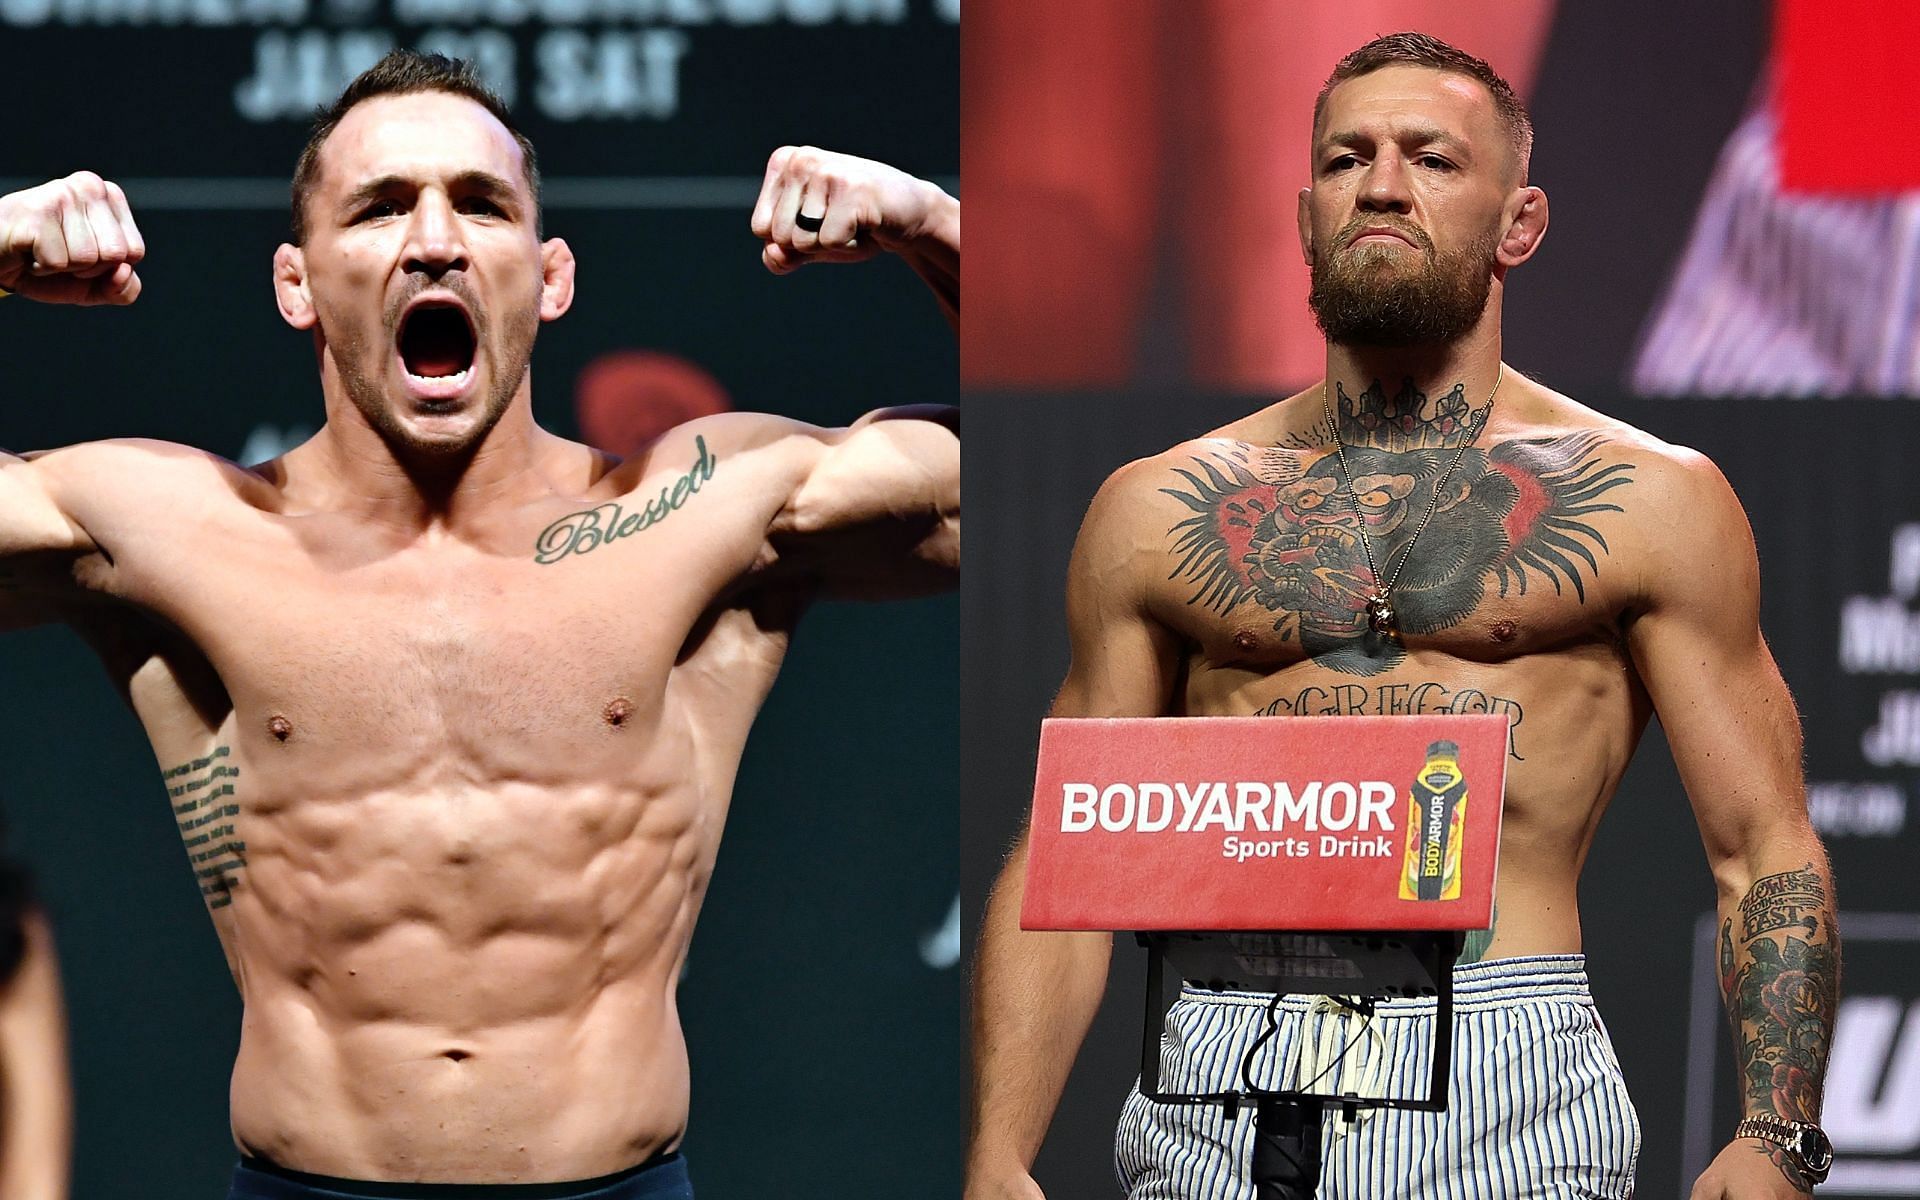 Michael Chandler (left) and Conor Mcgregor (right) [Image Credits: Getty Images]